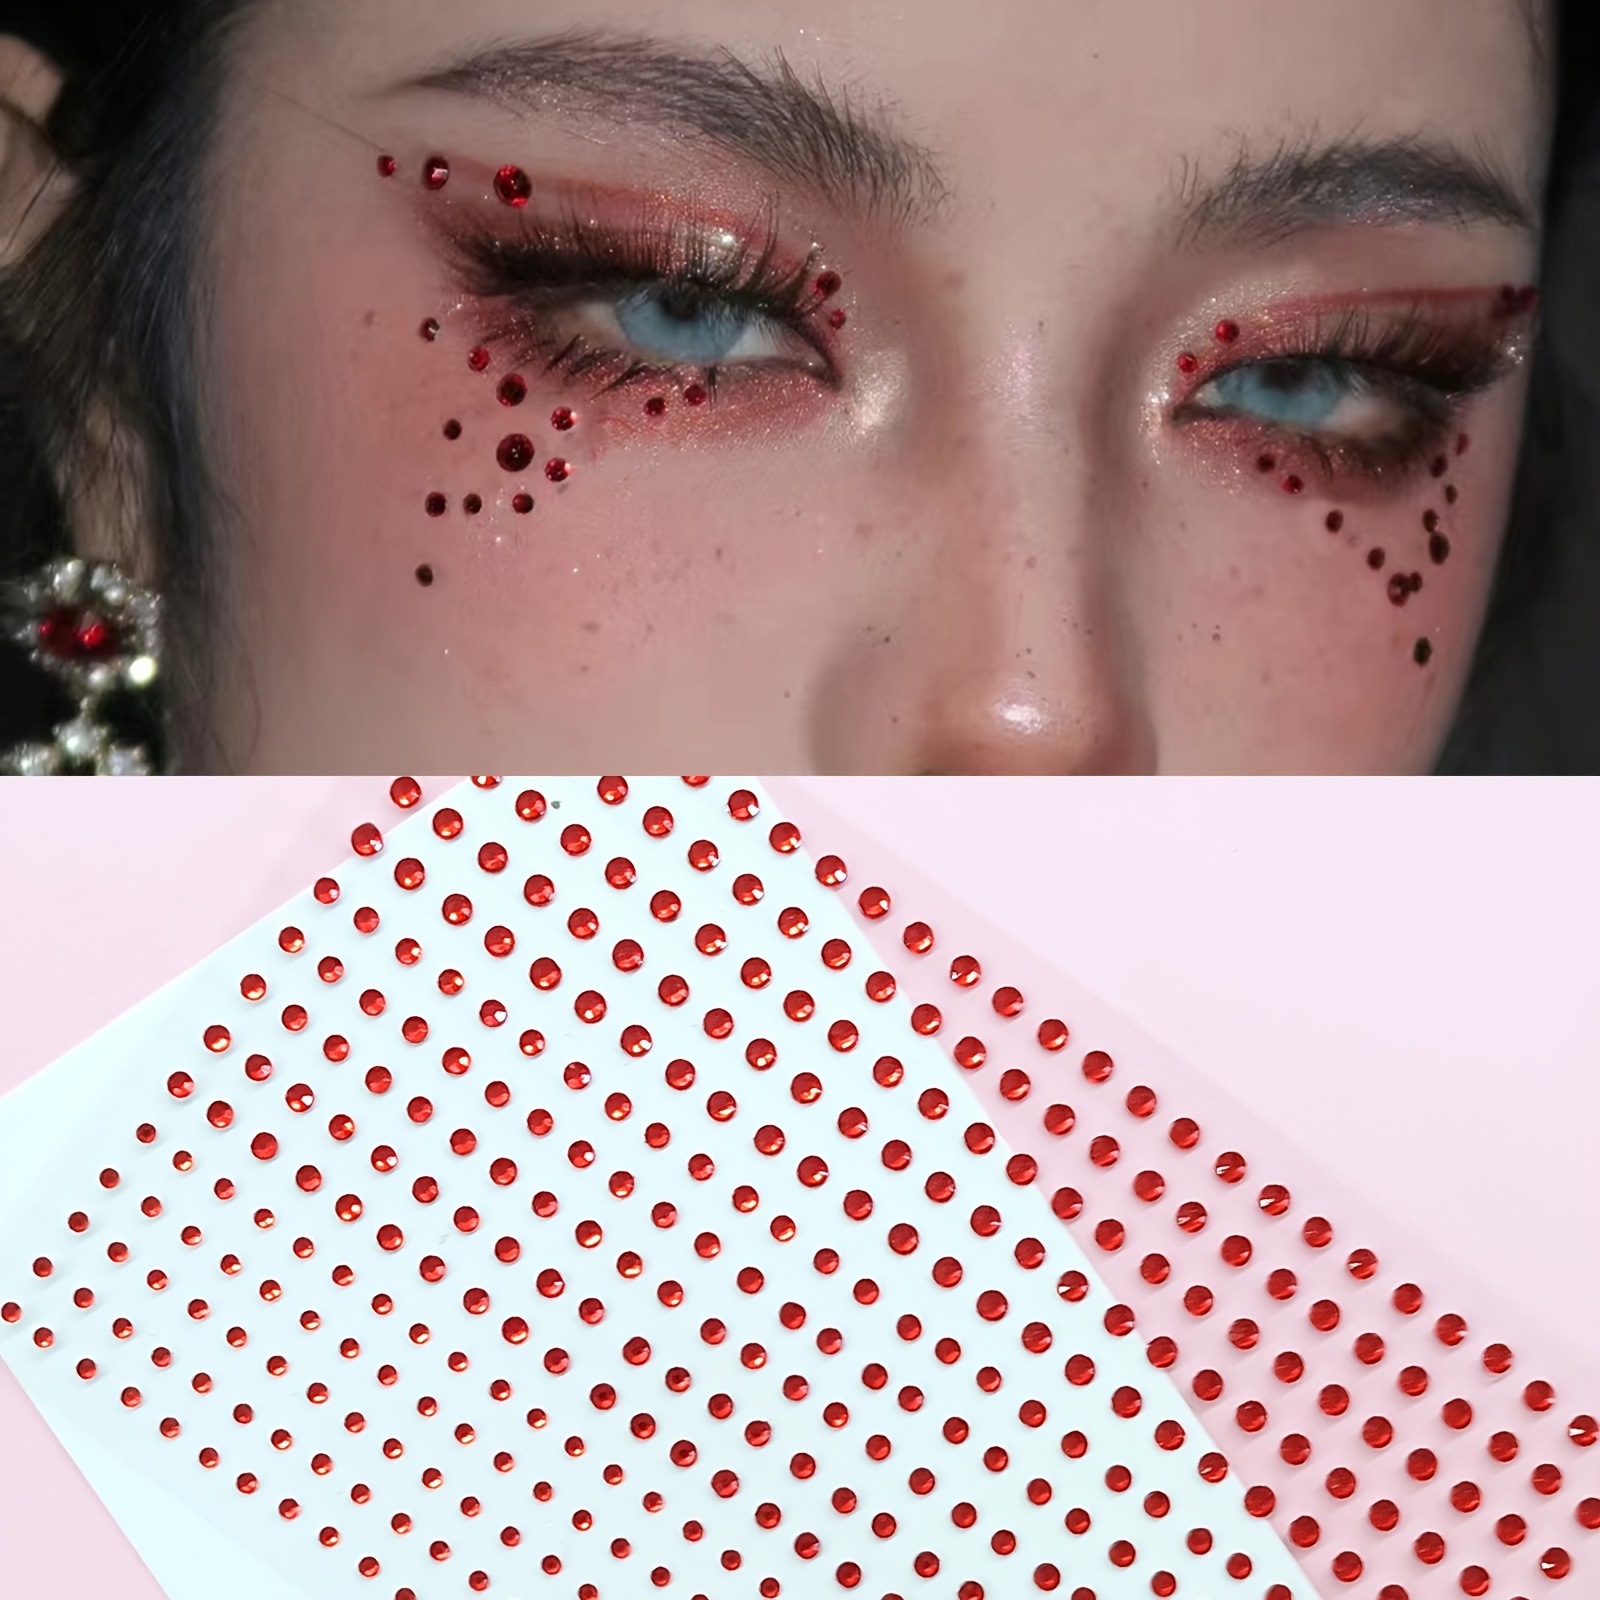 Facial Decorative Rhinestones Stickers, Butterfly Shape Red Acrylic Color  Eyebrow And Eye Stickers Tattoo Stickers, Diy Makeup Decors For Festival  Party - Beauty & Health - Temu